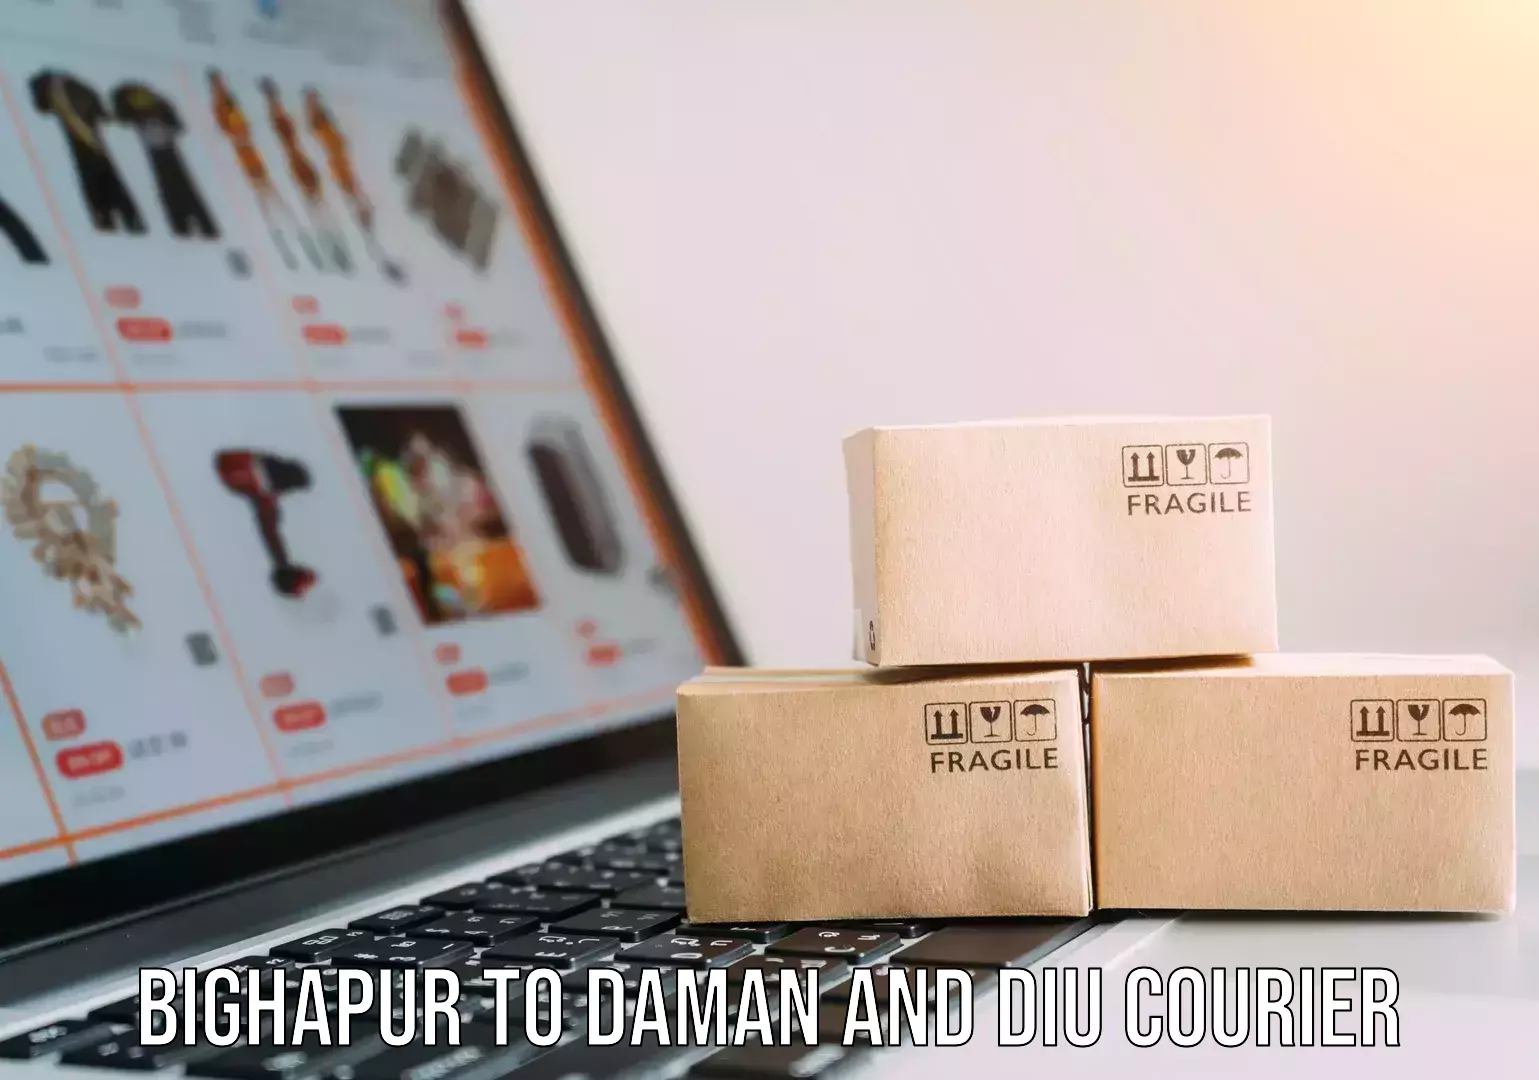 Same-day delivery options Bighapur to Daman and Diu